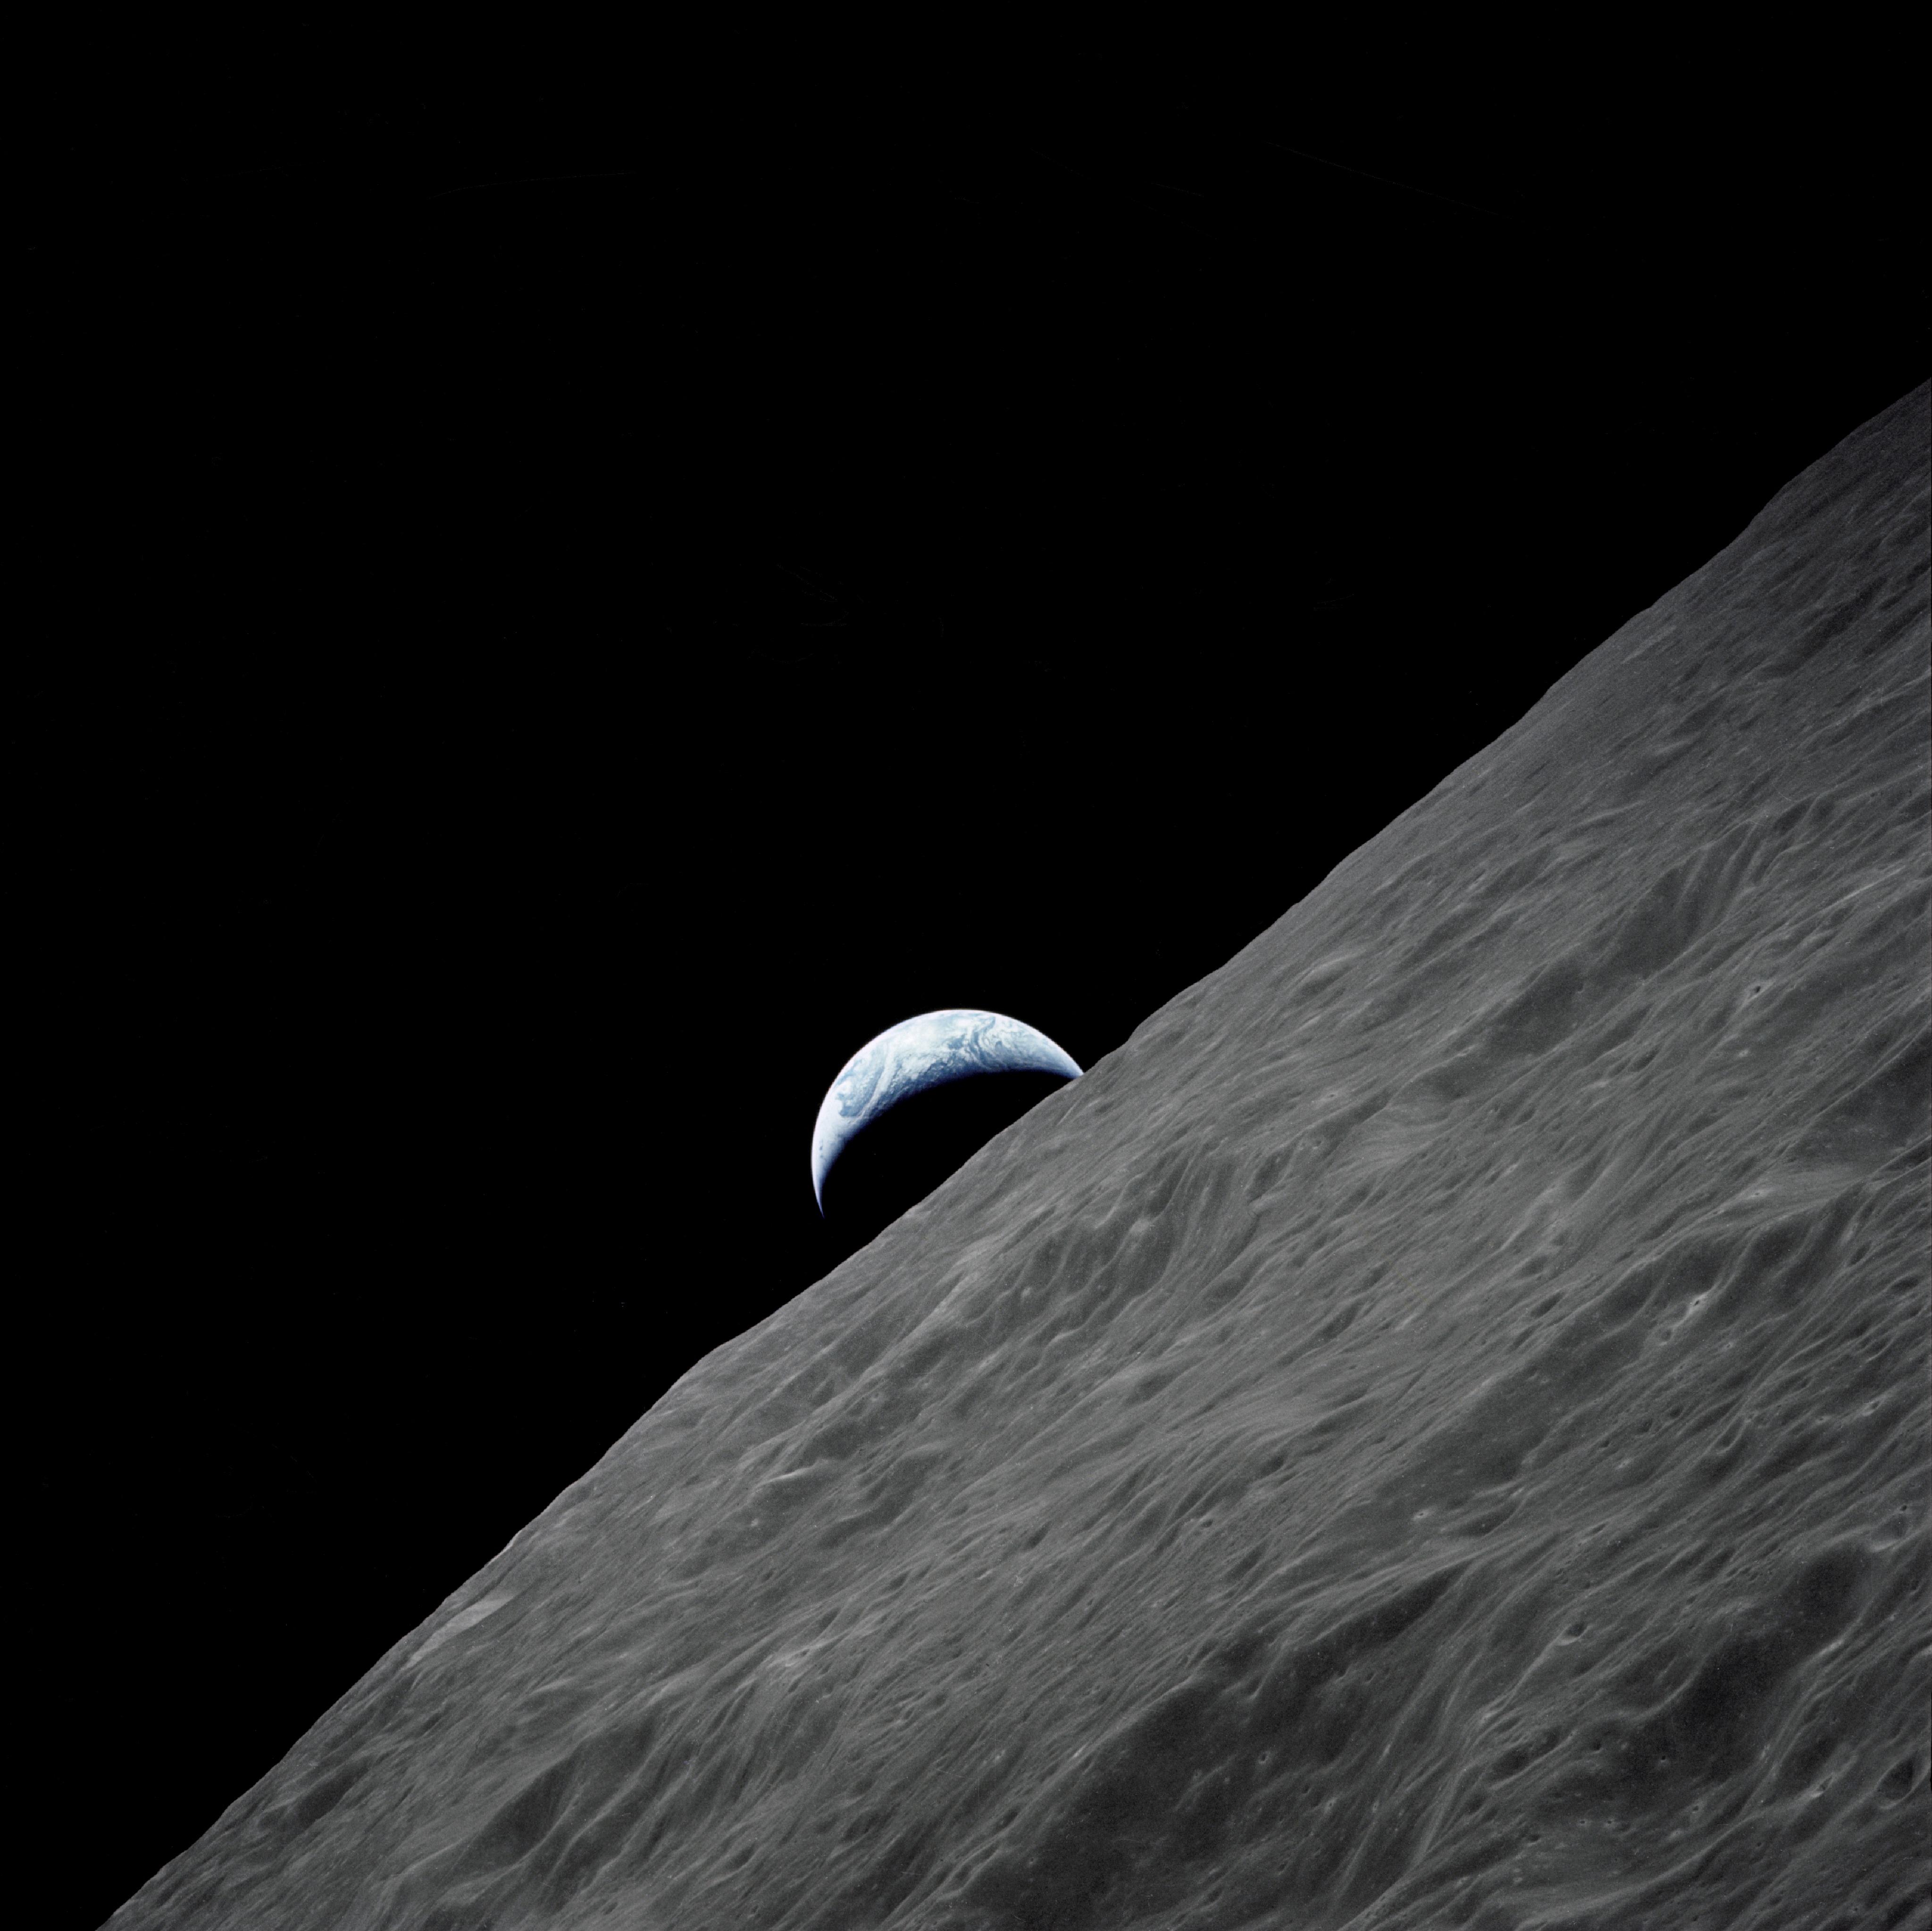 The crescent Earth rises above the lunar horizon in this spectacular photograph taken from the Apollo 17 spacecraft in lunar orbit during final lunar landing mission in the Apollo program.